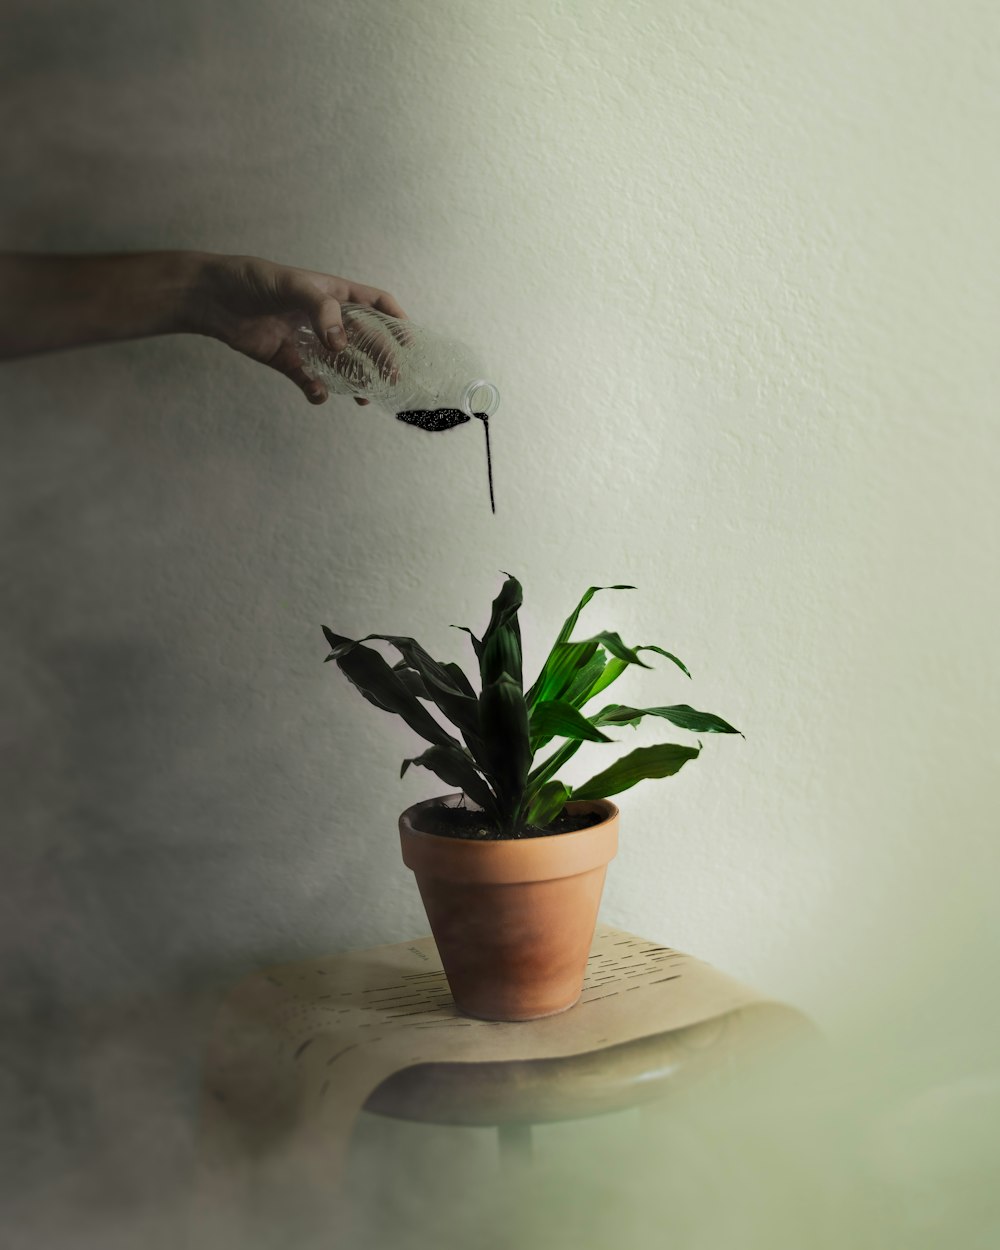 person watering green leafed plant with black liquid